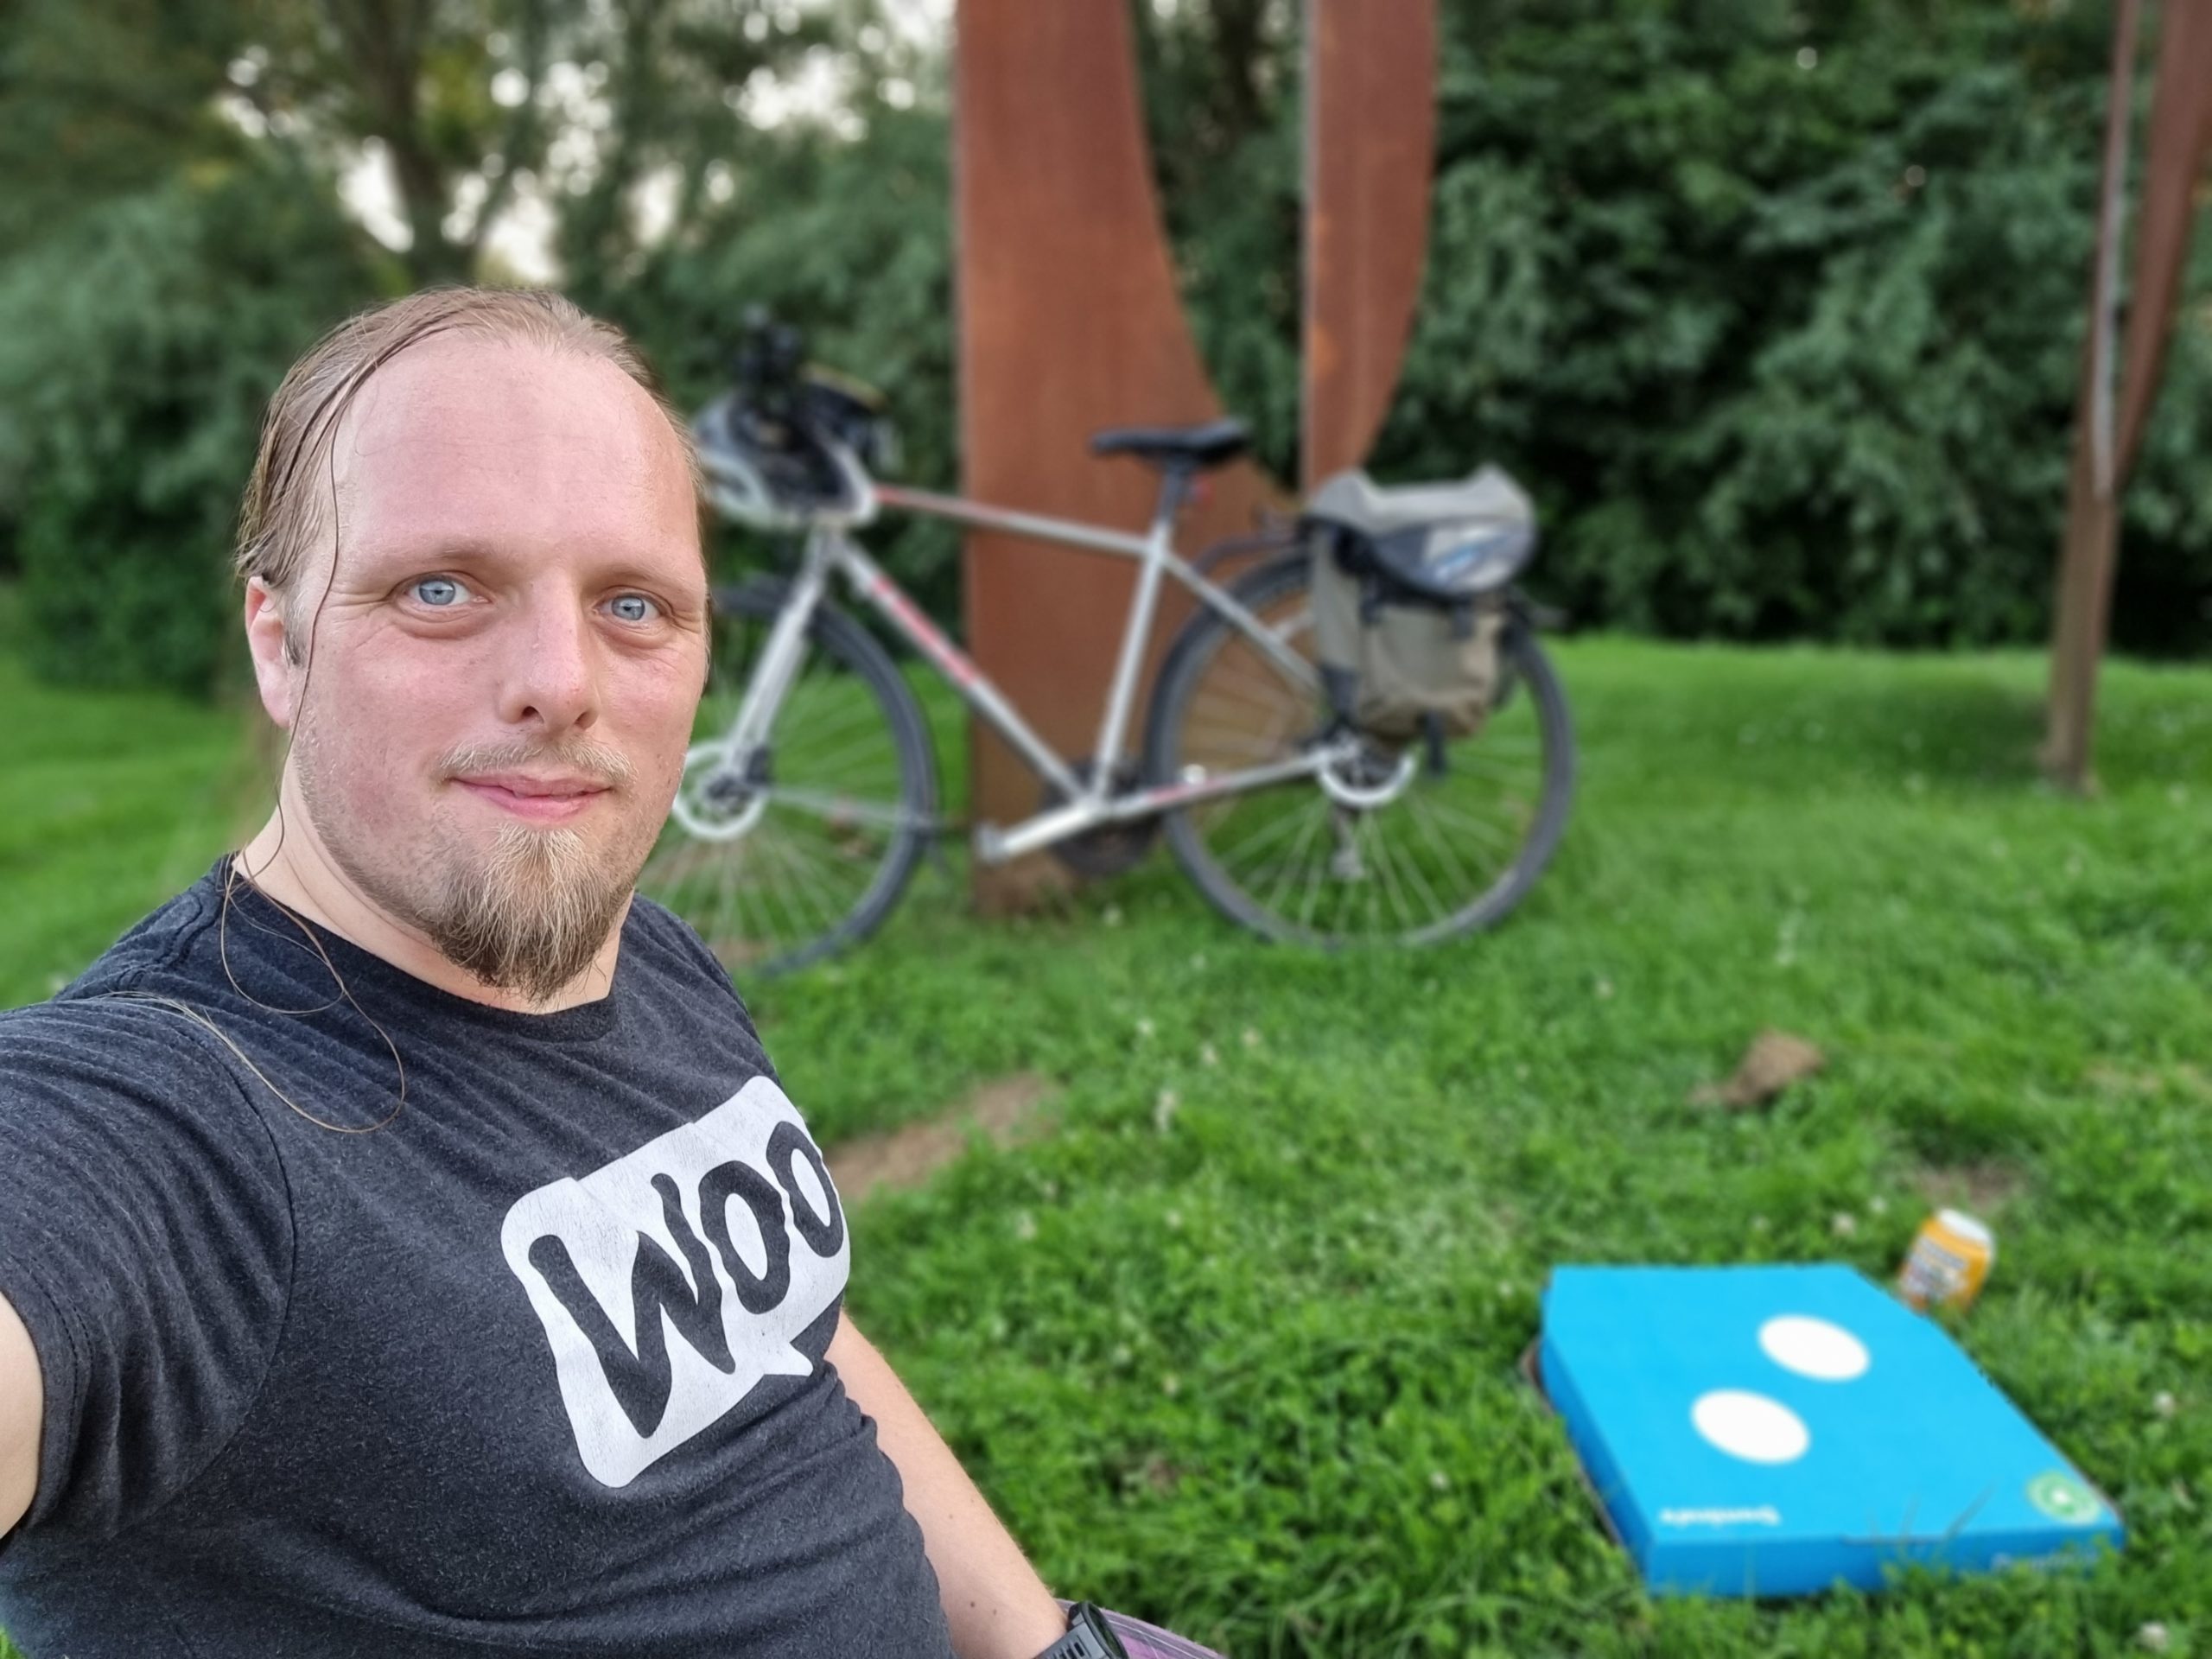 Dan sits on the grass with a Dominos pizza box and a can of beer. His bike is in the background, leaning on a stylistically-corroded piece of metal artwork.